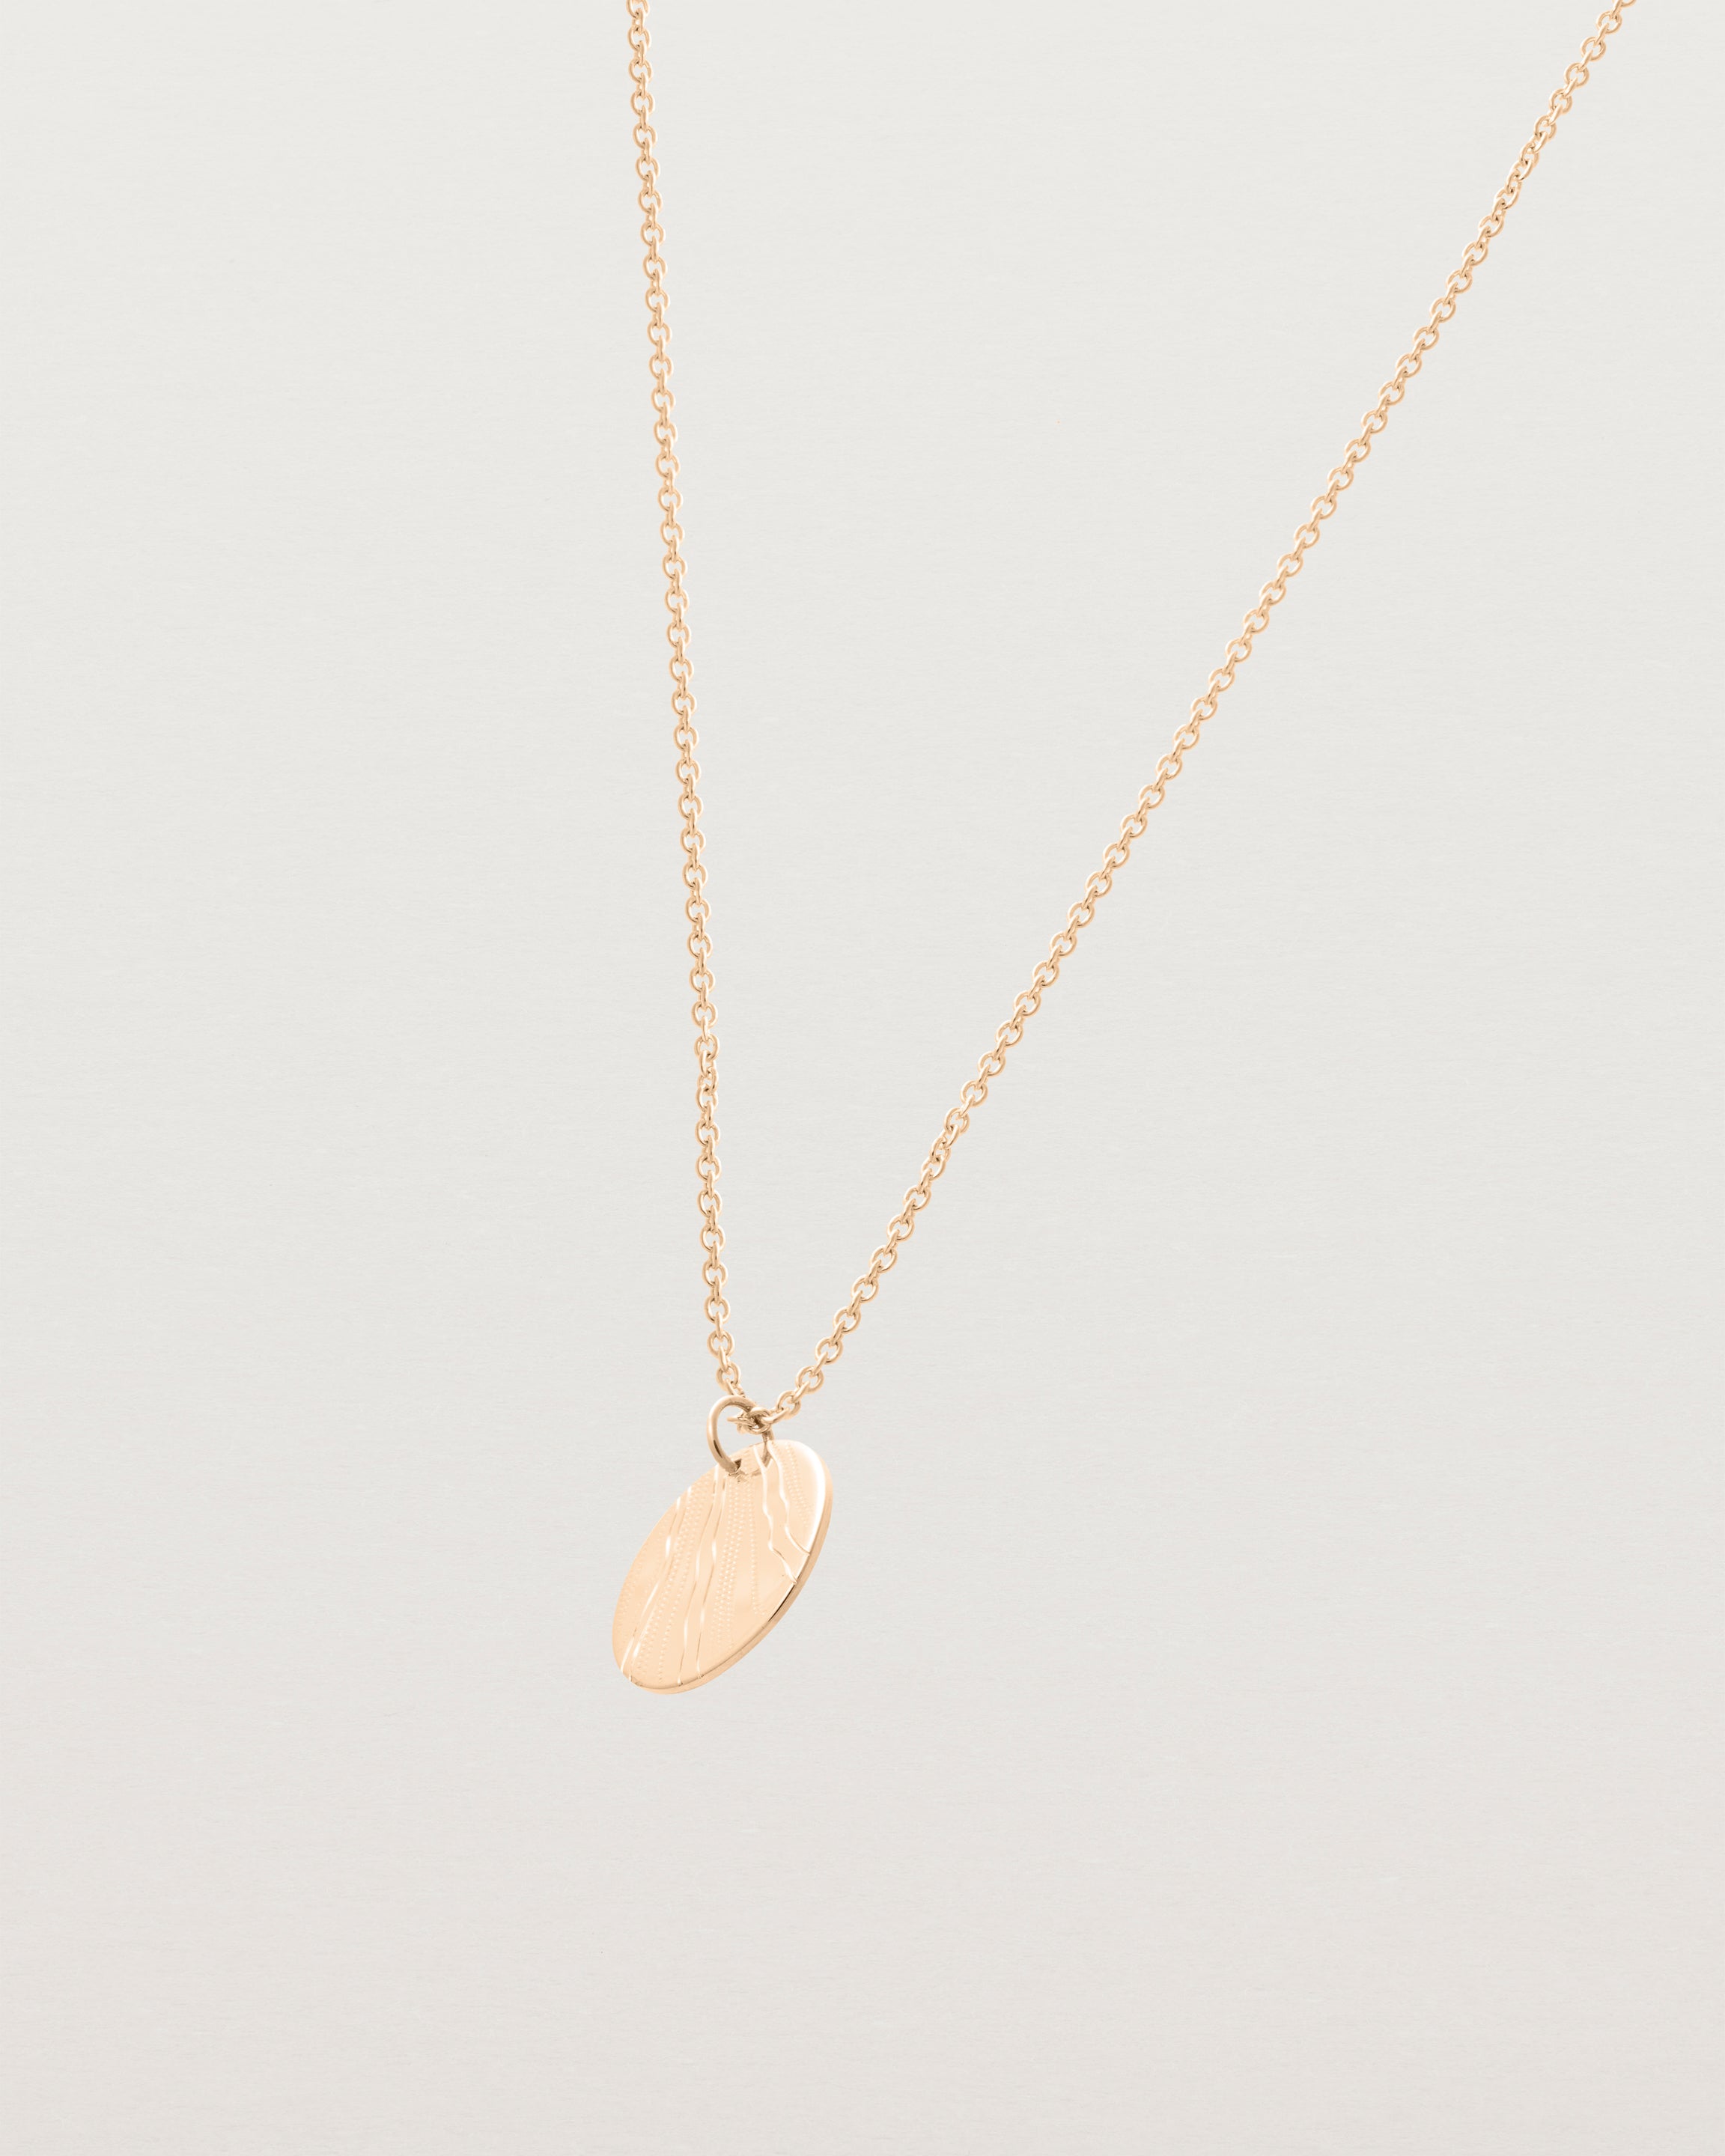 An engraved rose gold pendant